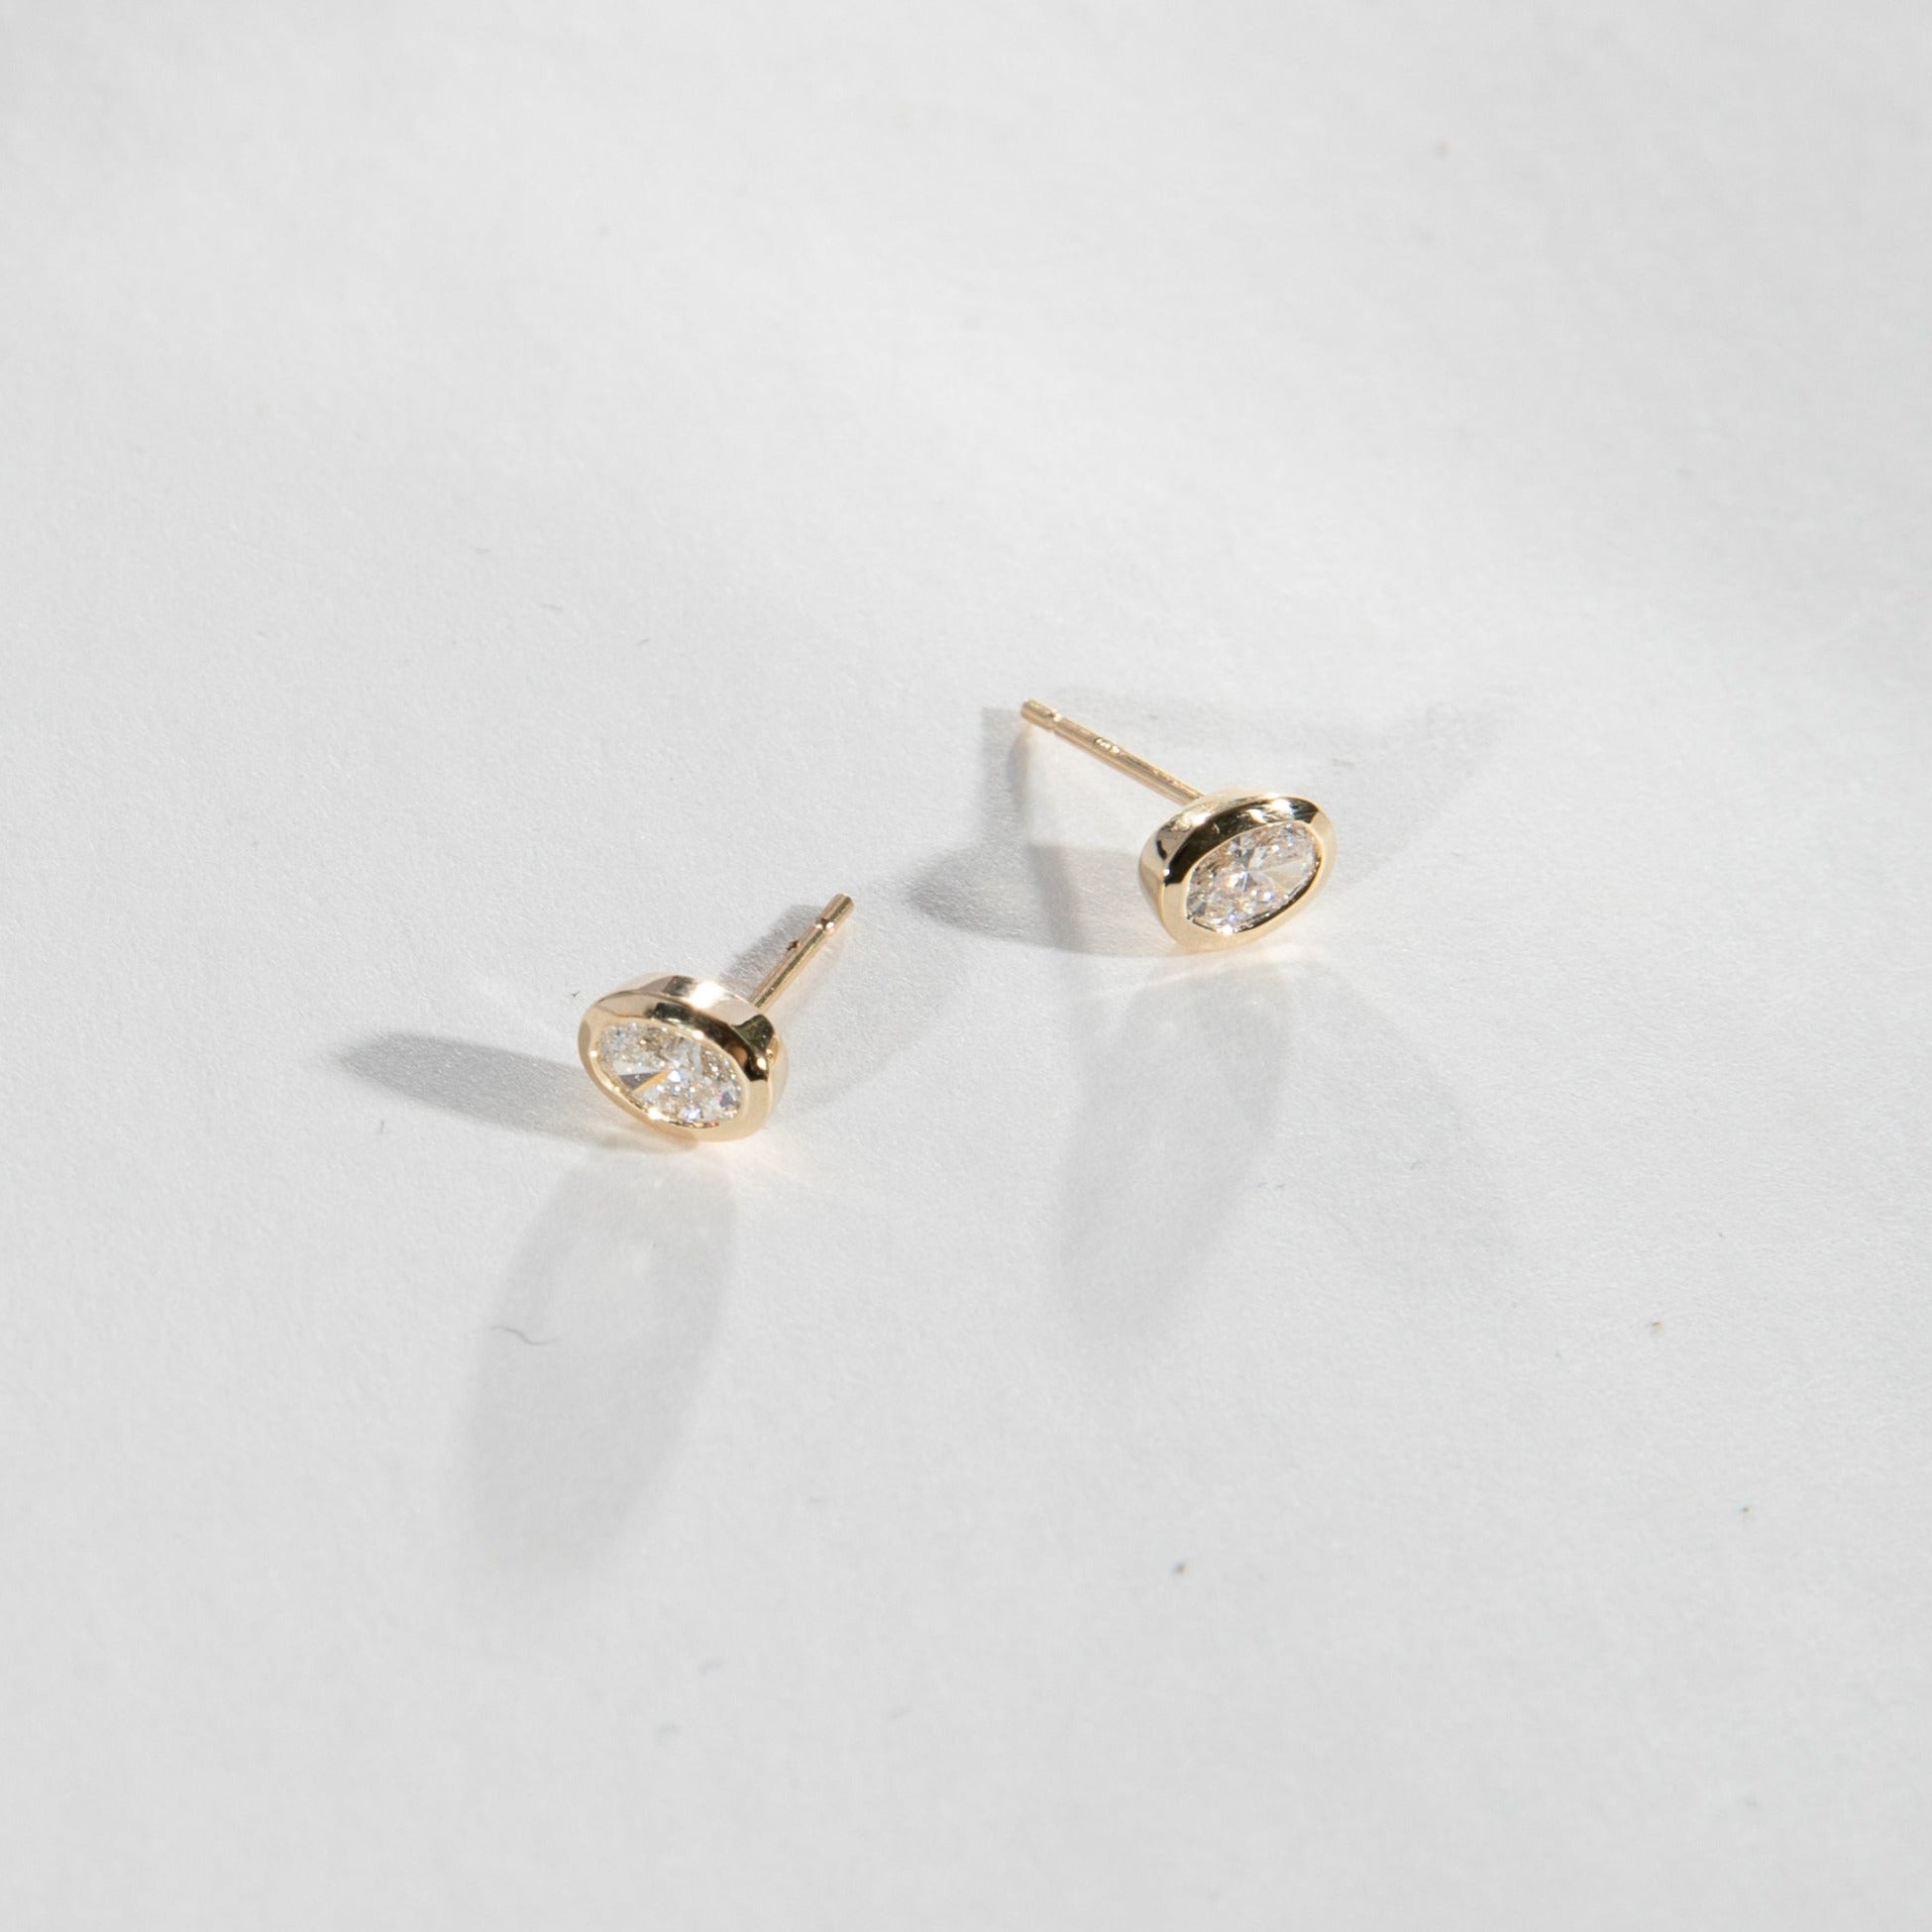 Ana Simple Earrings in 14k Gold set with lab-grown diamonds By SHW Fine Jewelry NYC